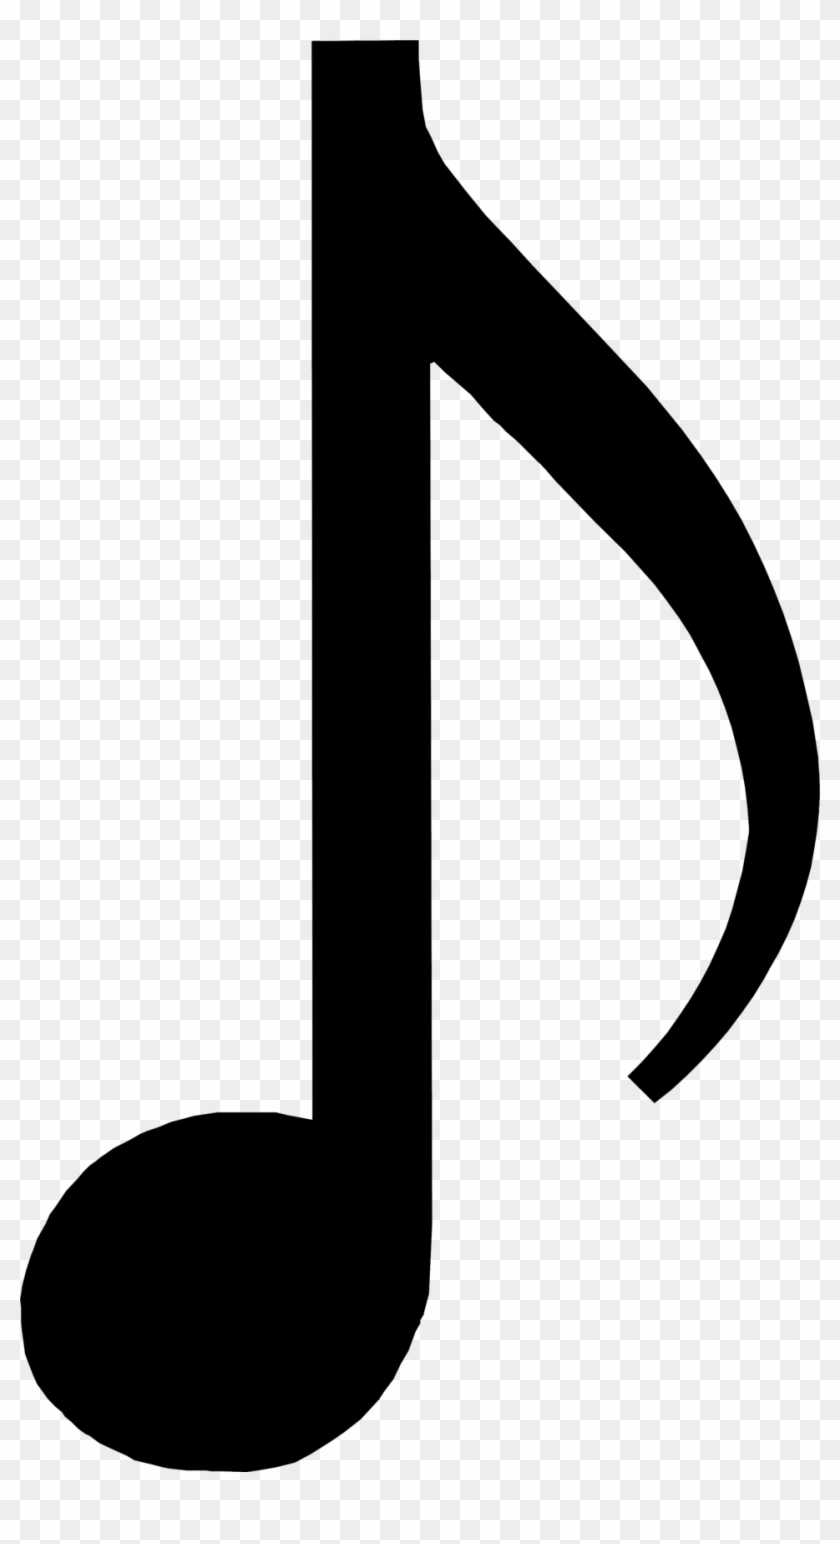 Music Notes Clip Art - Music Note Clipart Black And White #74343